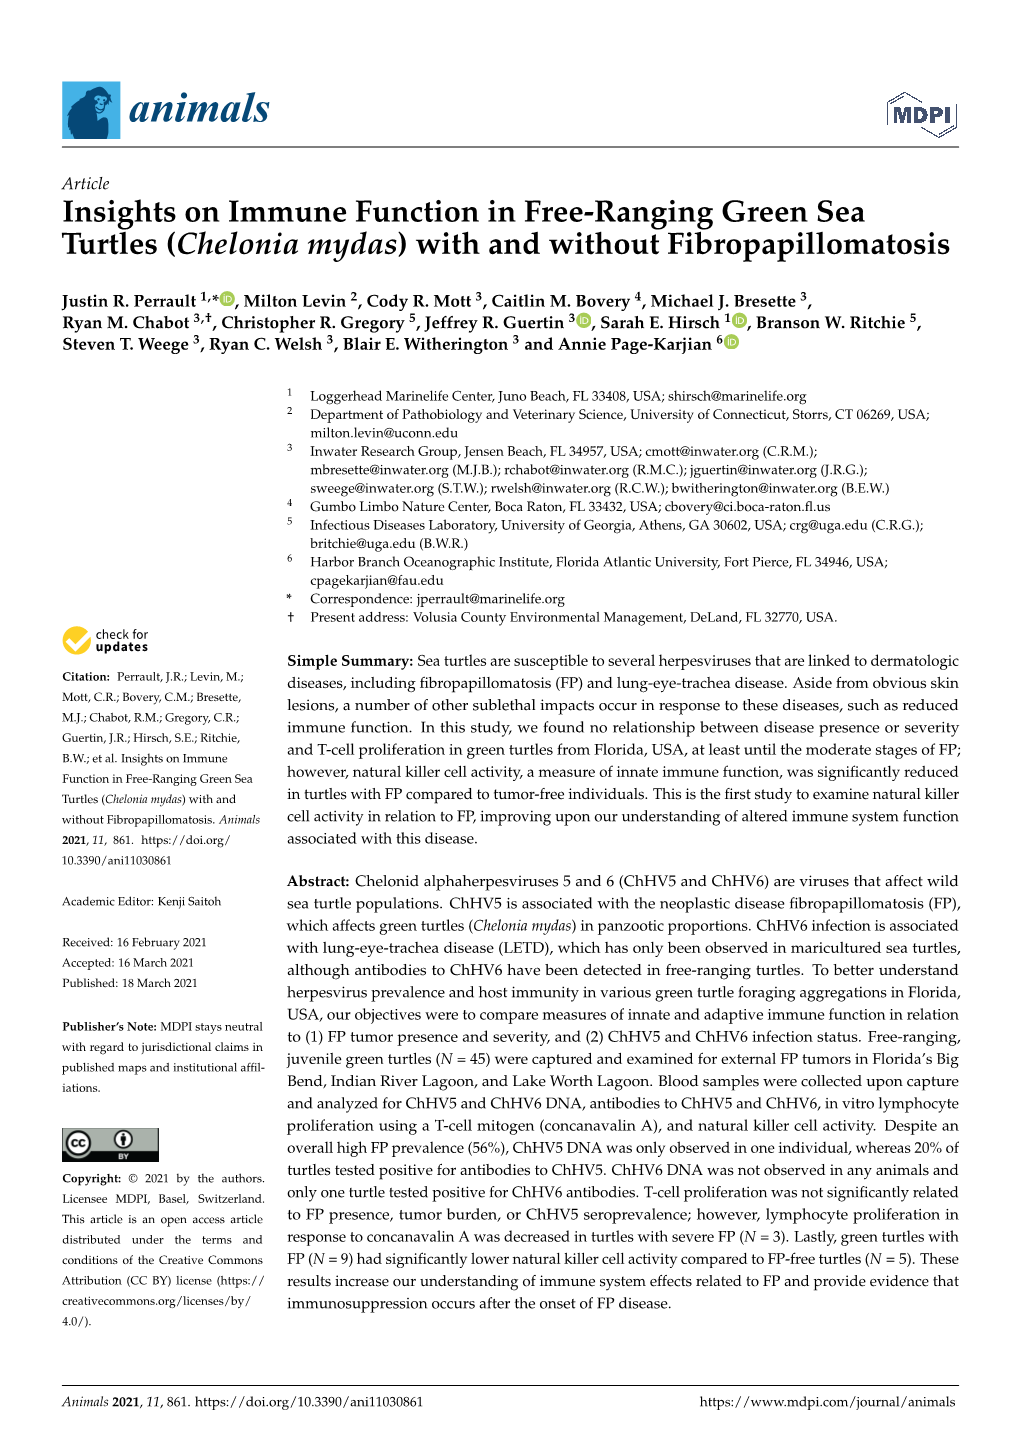 Insights on Immune Function in Free-Ranging Green Sea Turtles (Chelonia Mydas) with and Without Fibropapillomatosis